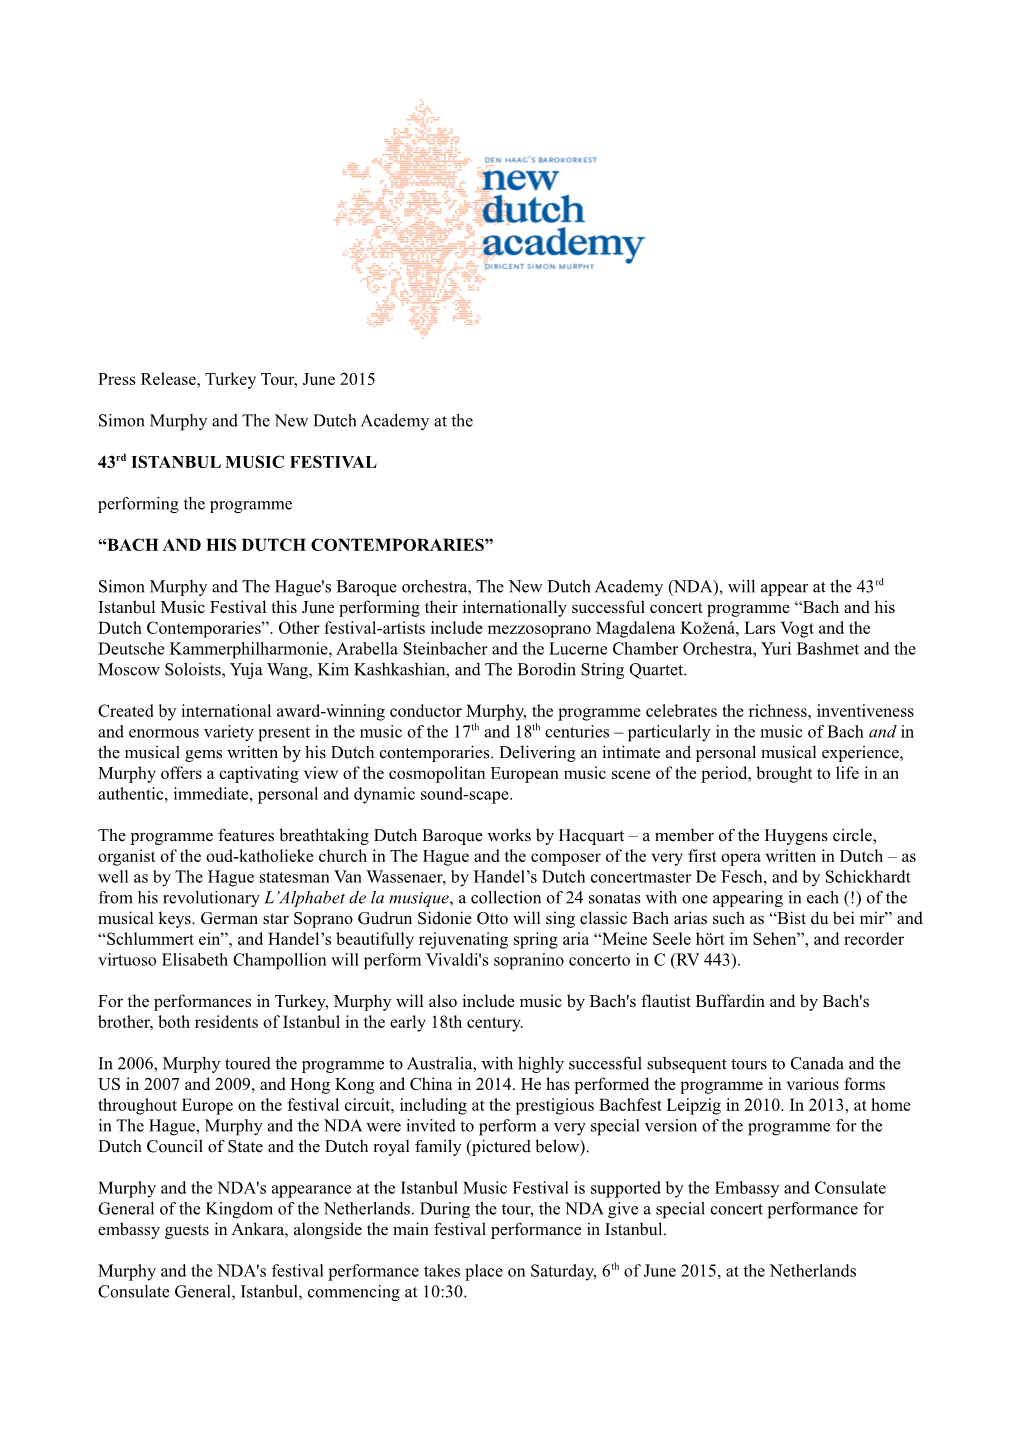 Press Release, Turkey Tour, June 2015 Simon Murphy and the New Dutch Academy at the 43Rd ISTANBUL MUSIC FESTIVAL Performing